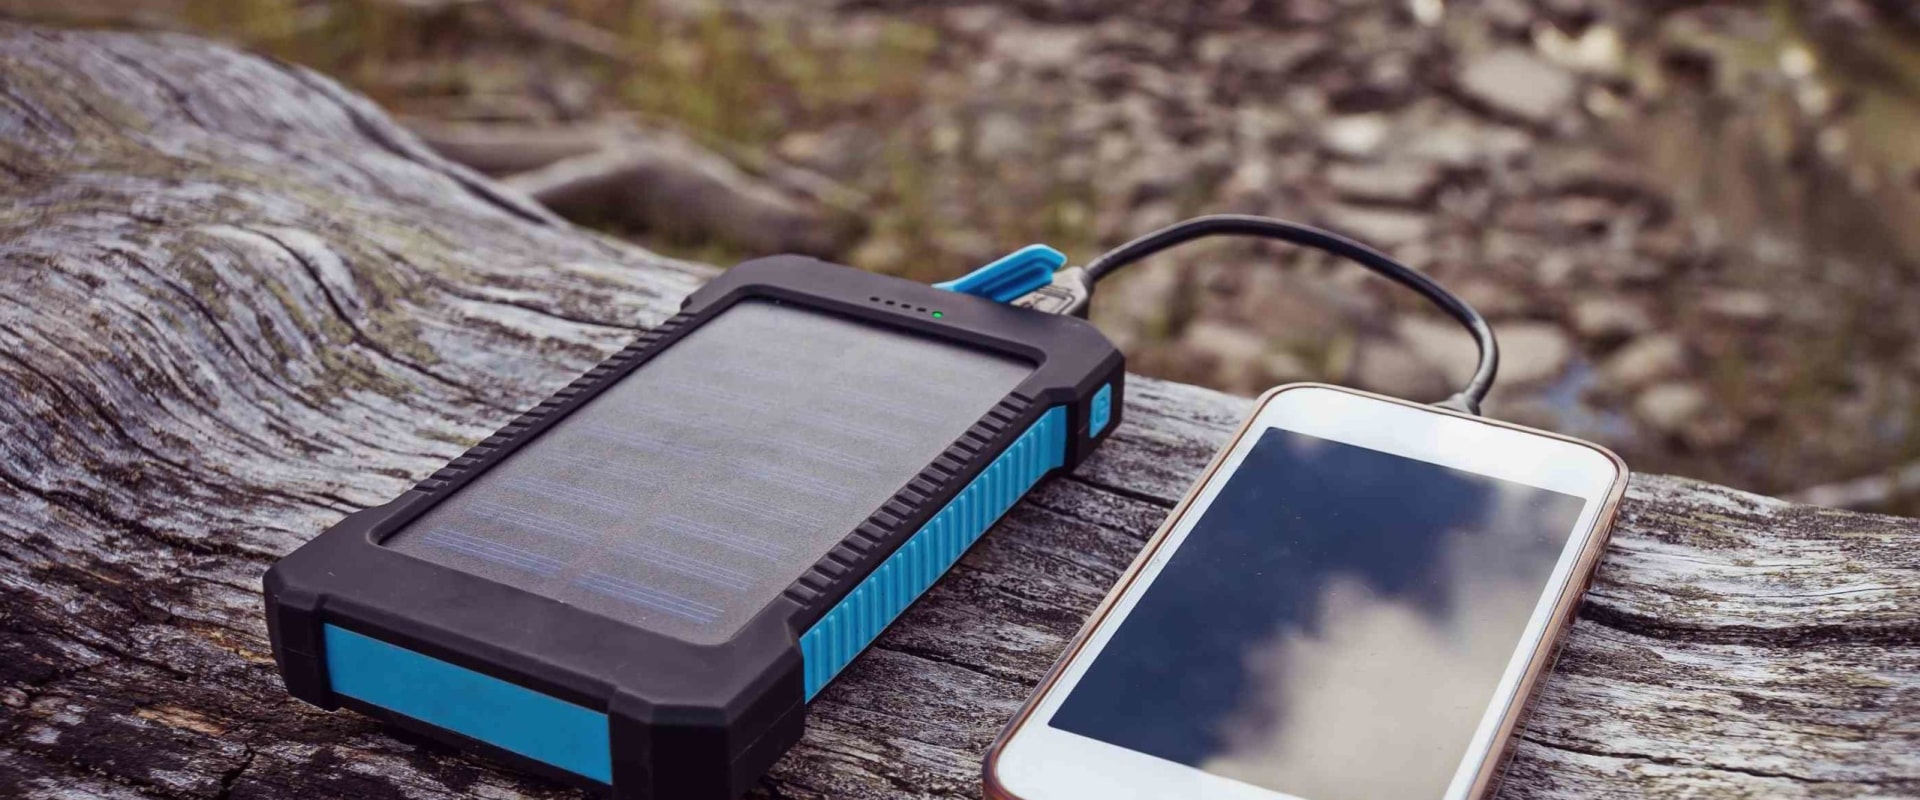 What is a Solar Power Bank and How Does it Work?